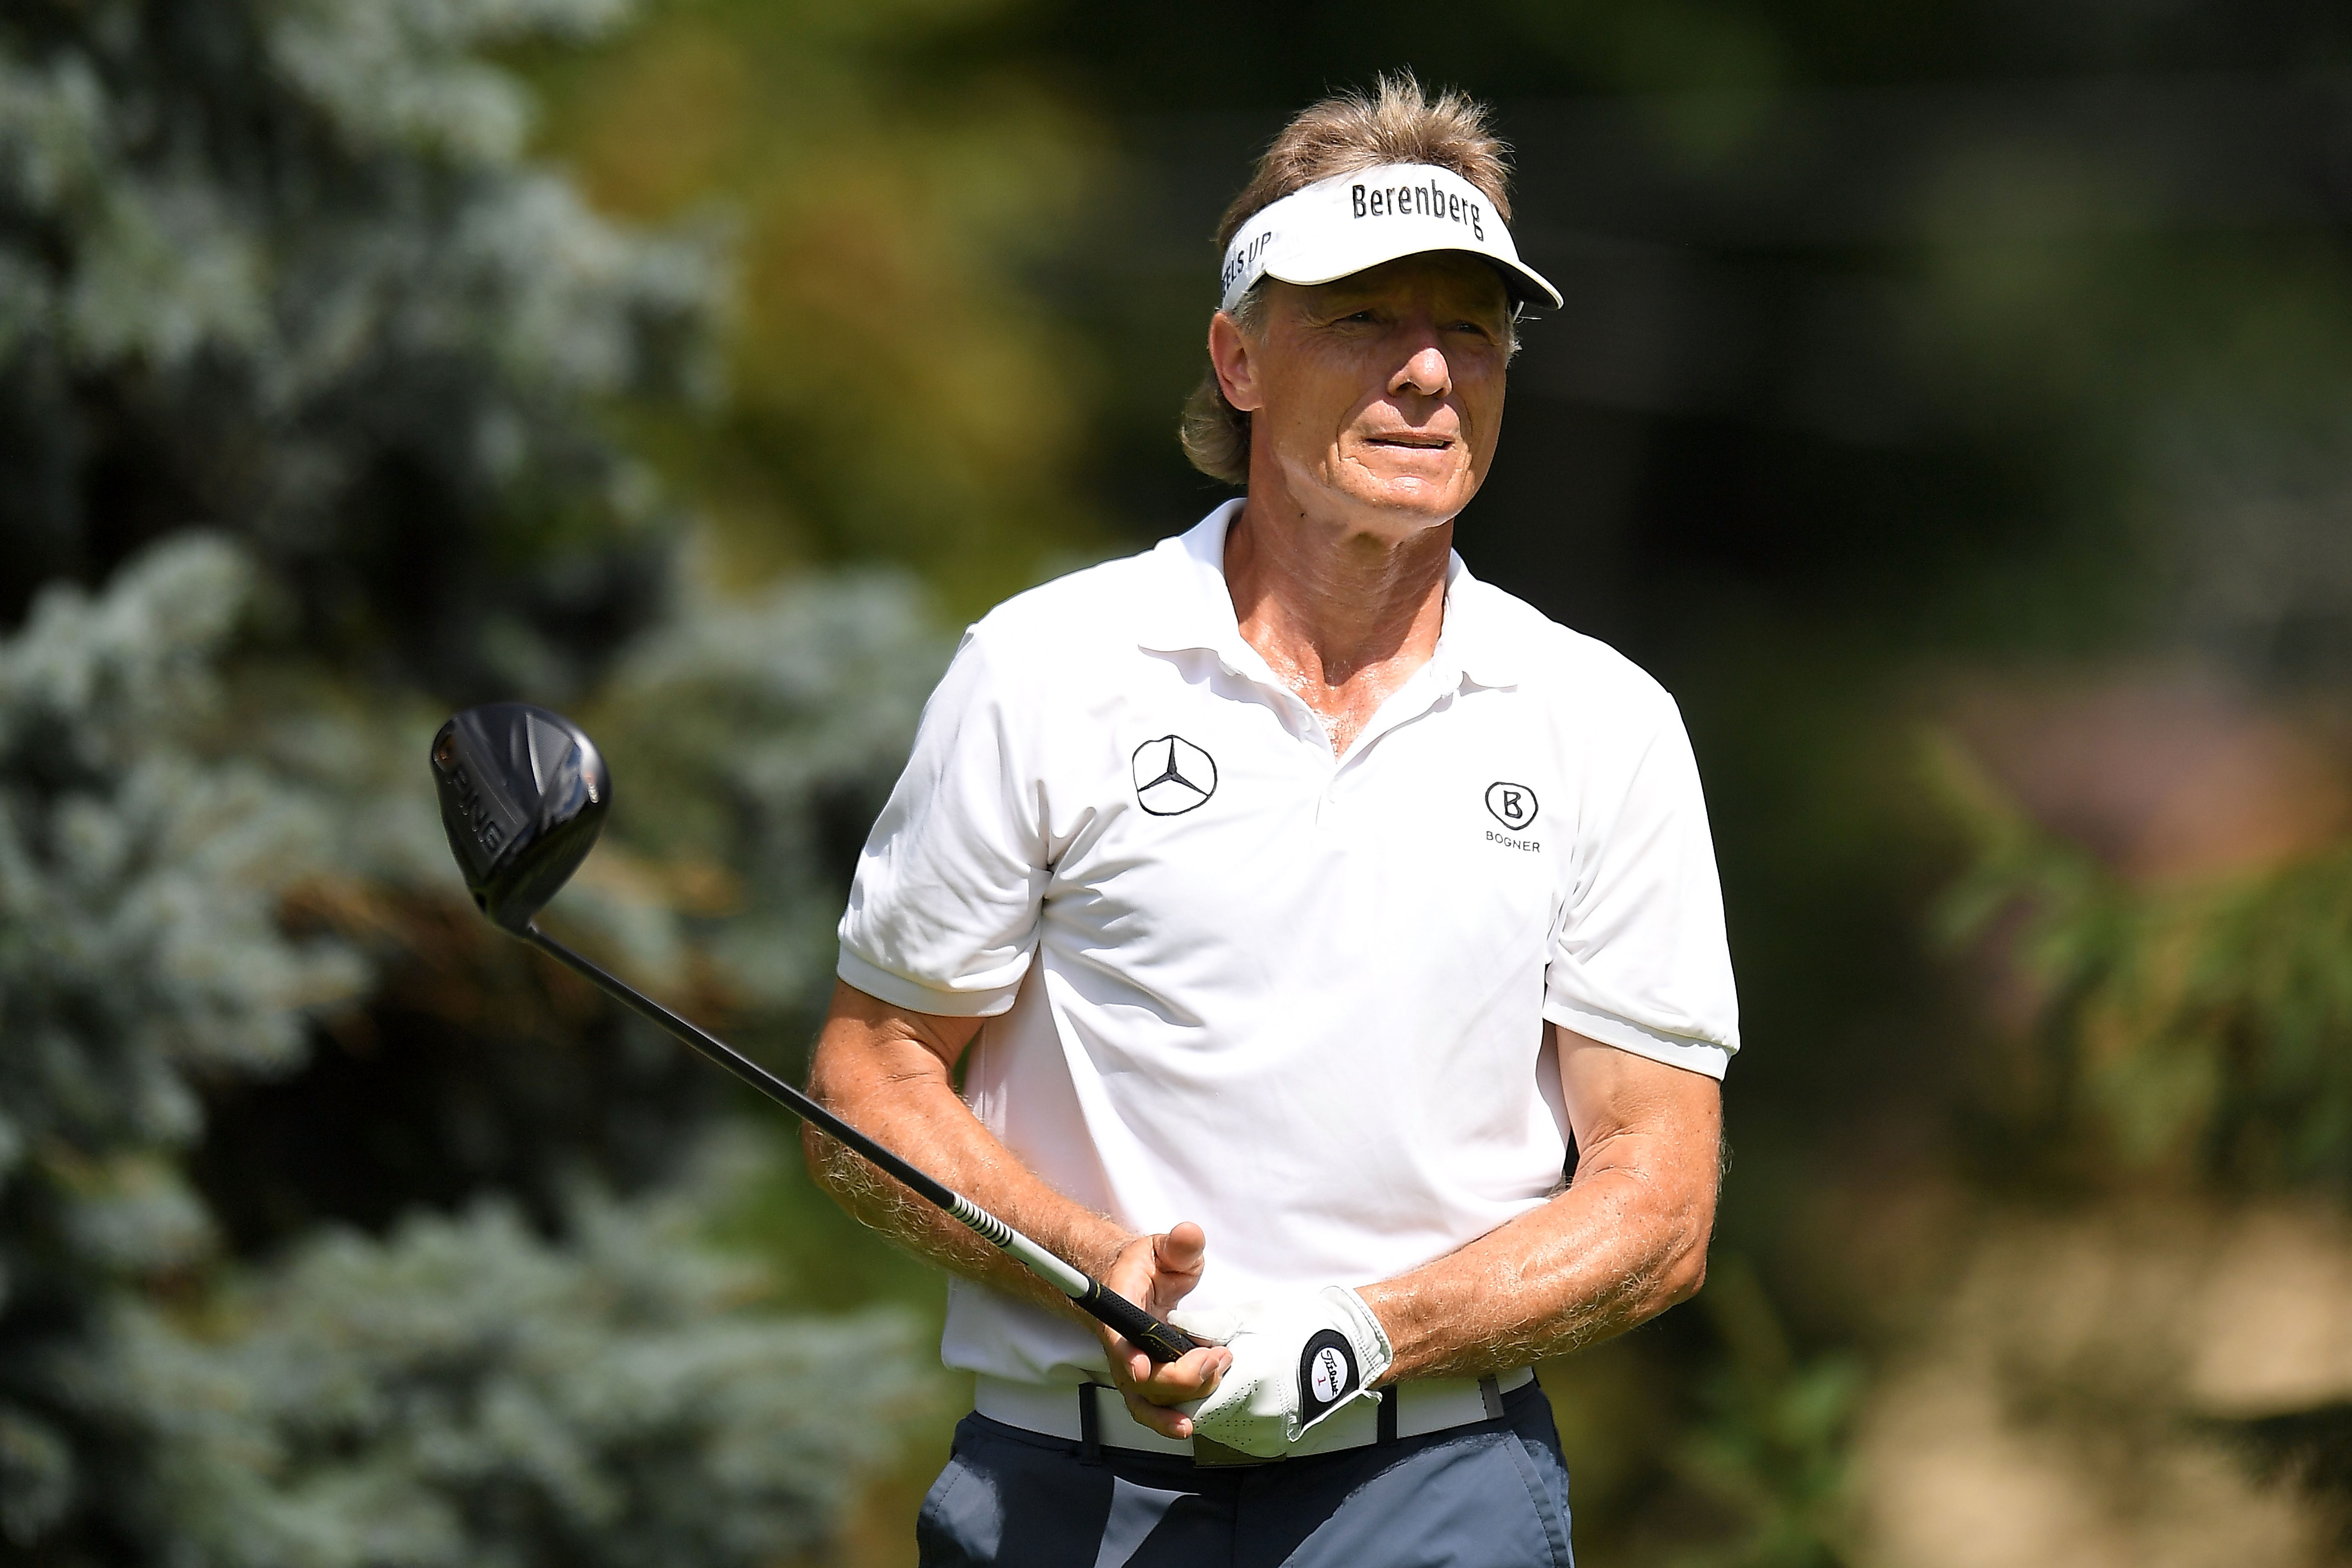 Bernhard Langer shoots record 22-under to cruise to 2018 SAS Championship victory